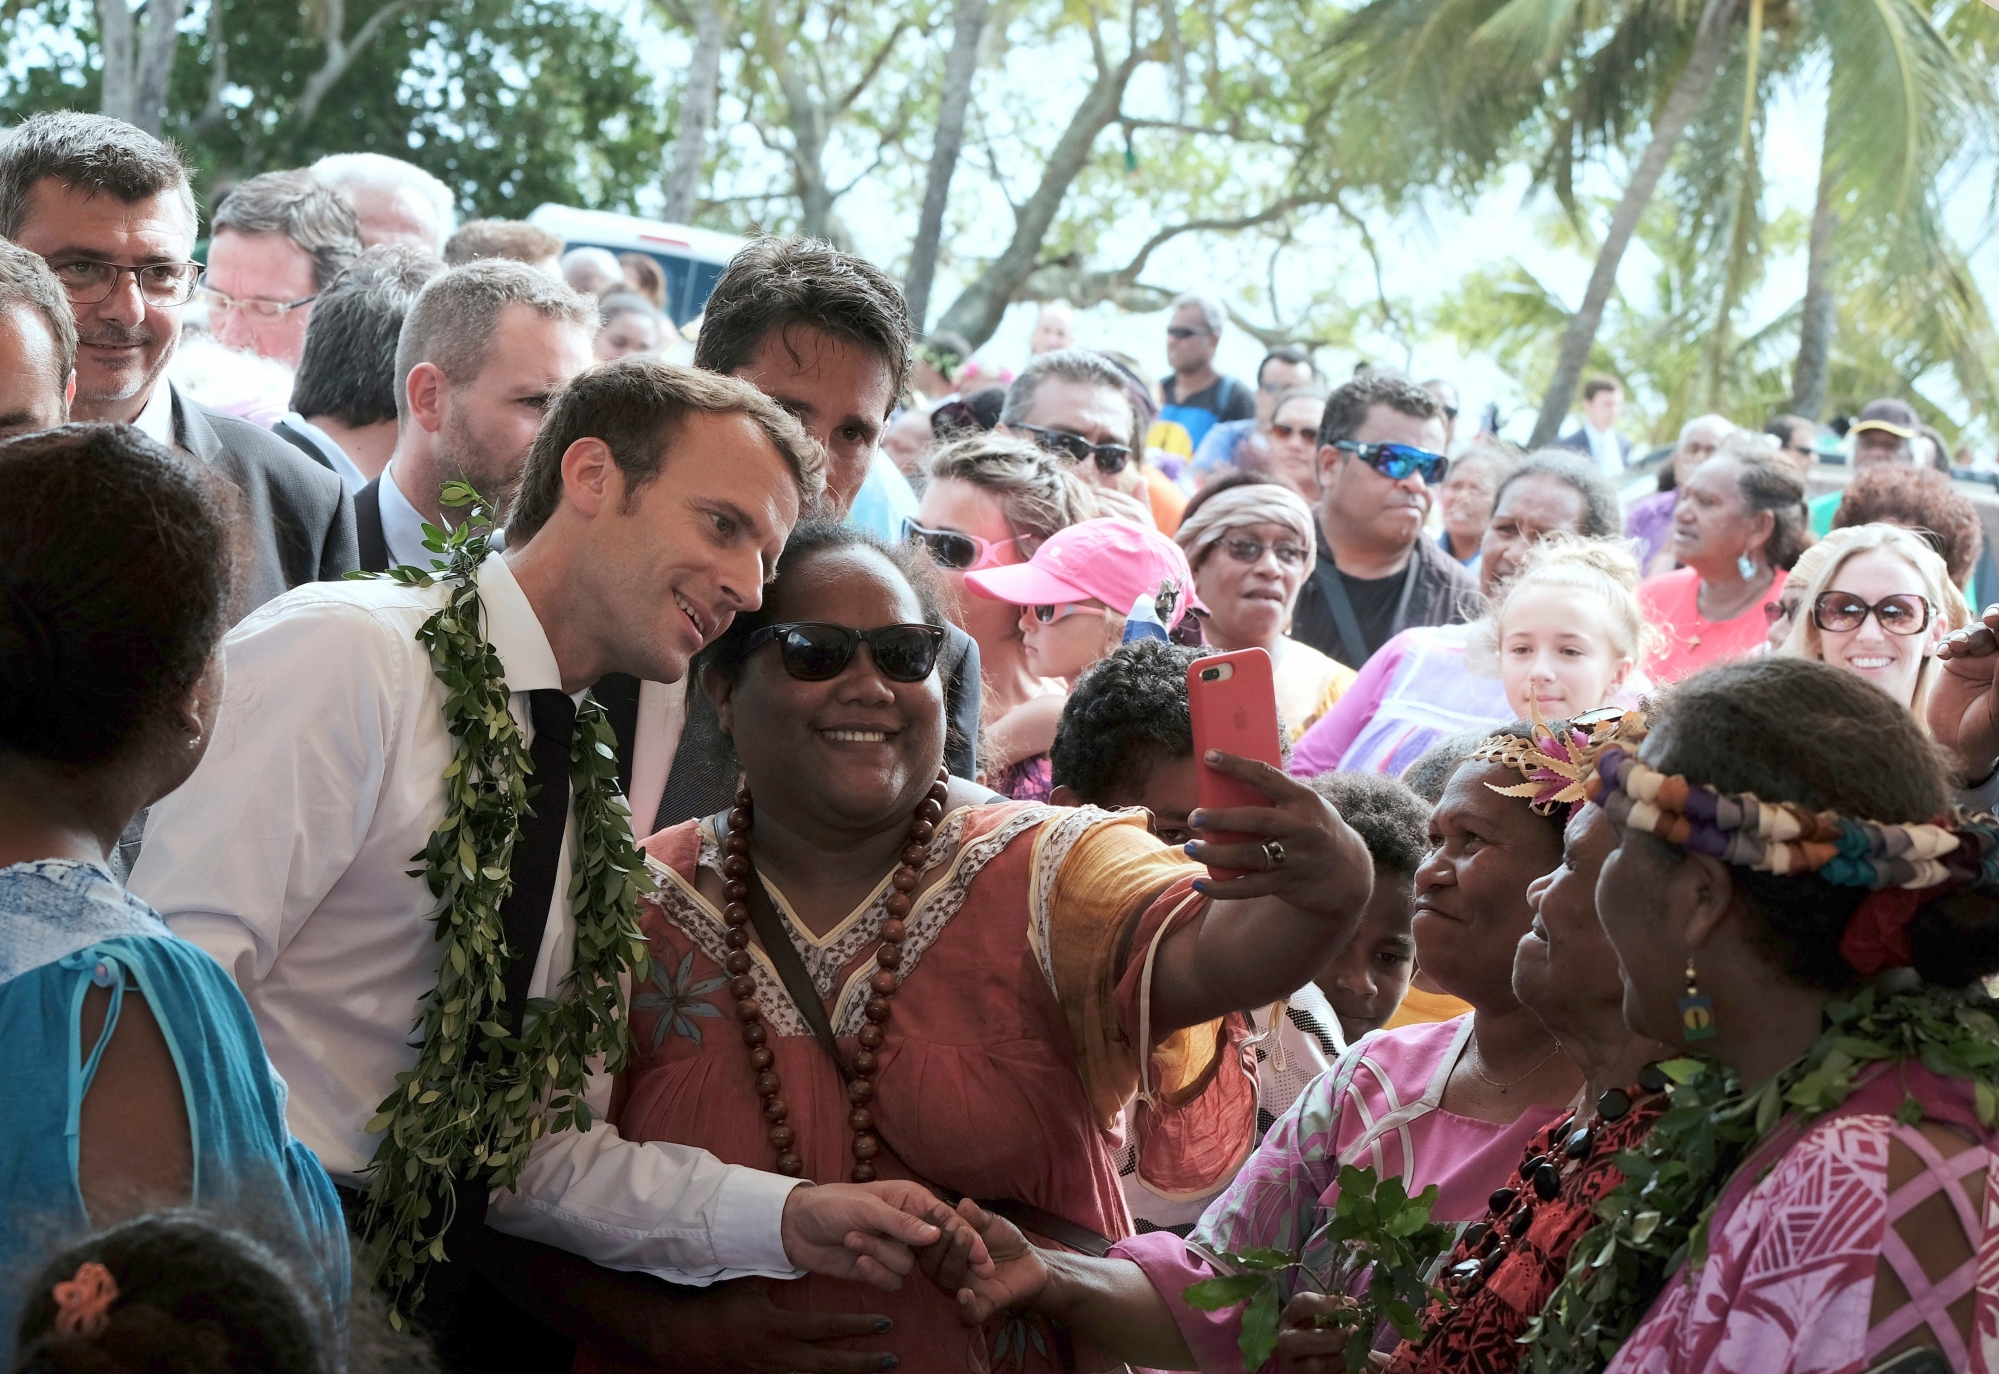 FILE - In this Saturday, May 5, 2018 file photo French President Emmanuel Macron, left, poses for a selfie while meeting residents as part of a remembrance ceremony on the Ouvea Island, off New Caledonia. New Caledonia, a French archipelago in the South Pacific, is preparing for an independence referendum upcoming Sunday Nov. 4, 2018, the last step in a three-decades-long decolonization effort. (AP Photo/Theo Rouby, File) New Caledonia Referendum